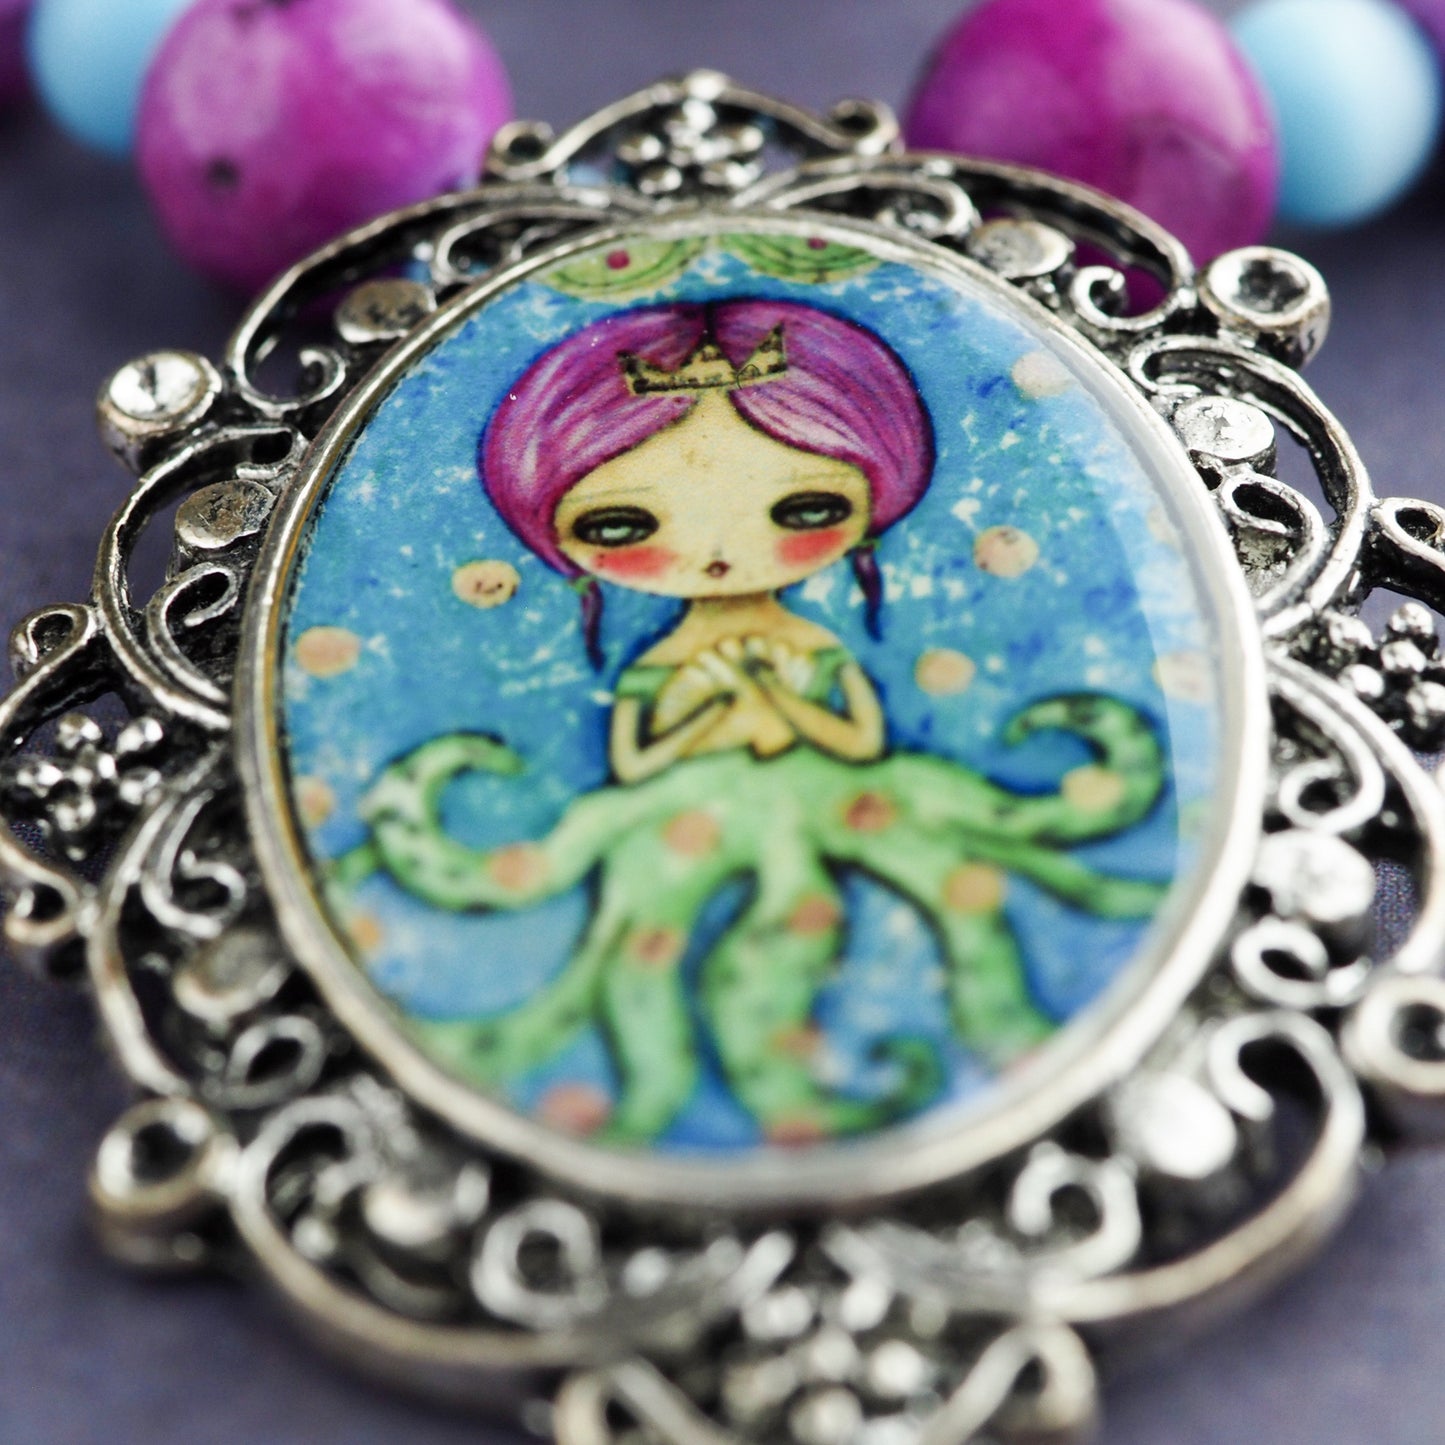 Octopus mermaid girl necklace by Danita. One of a kind jewelry with faceted glass beads.